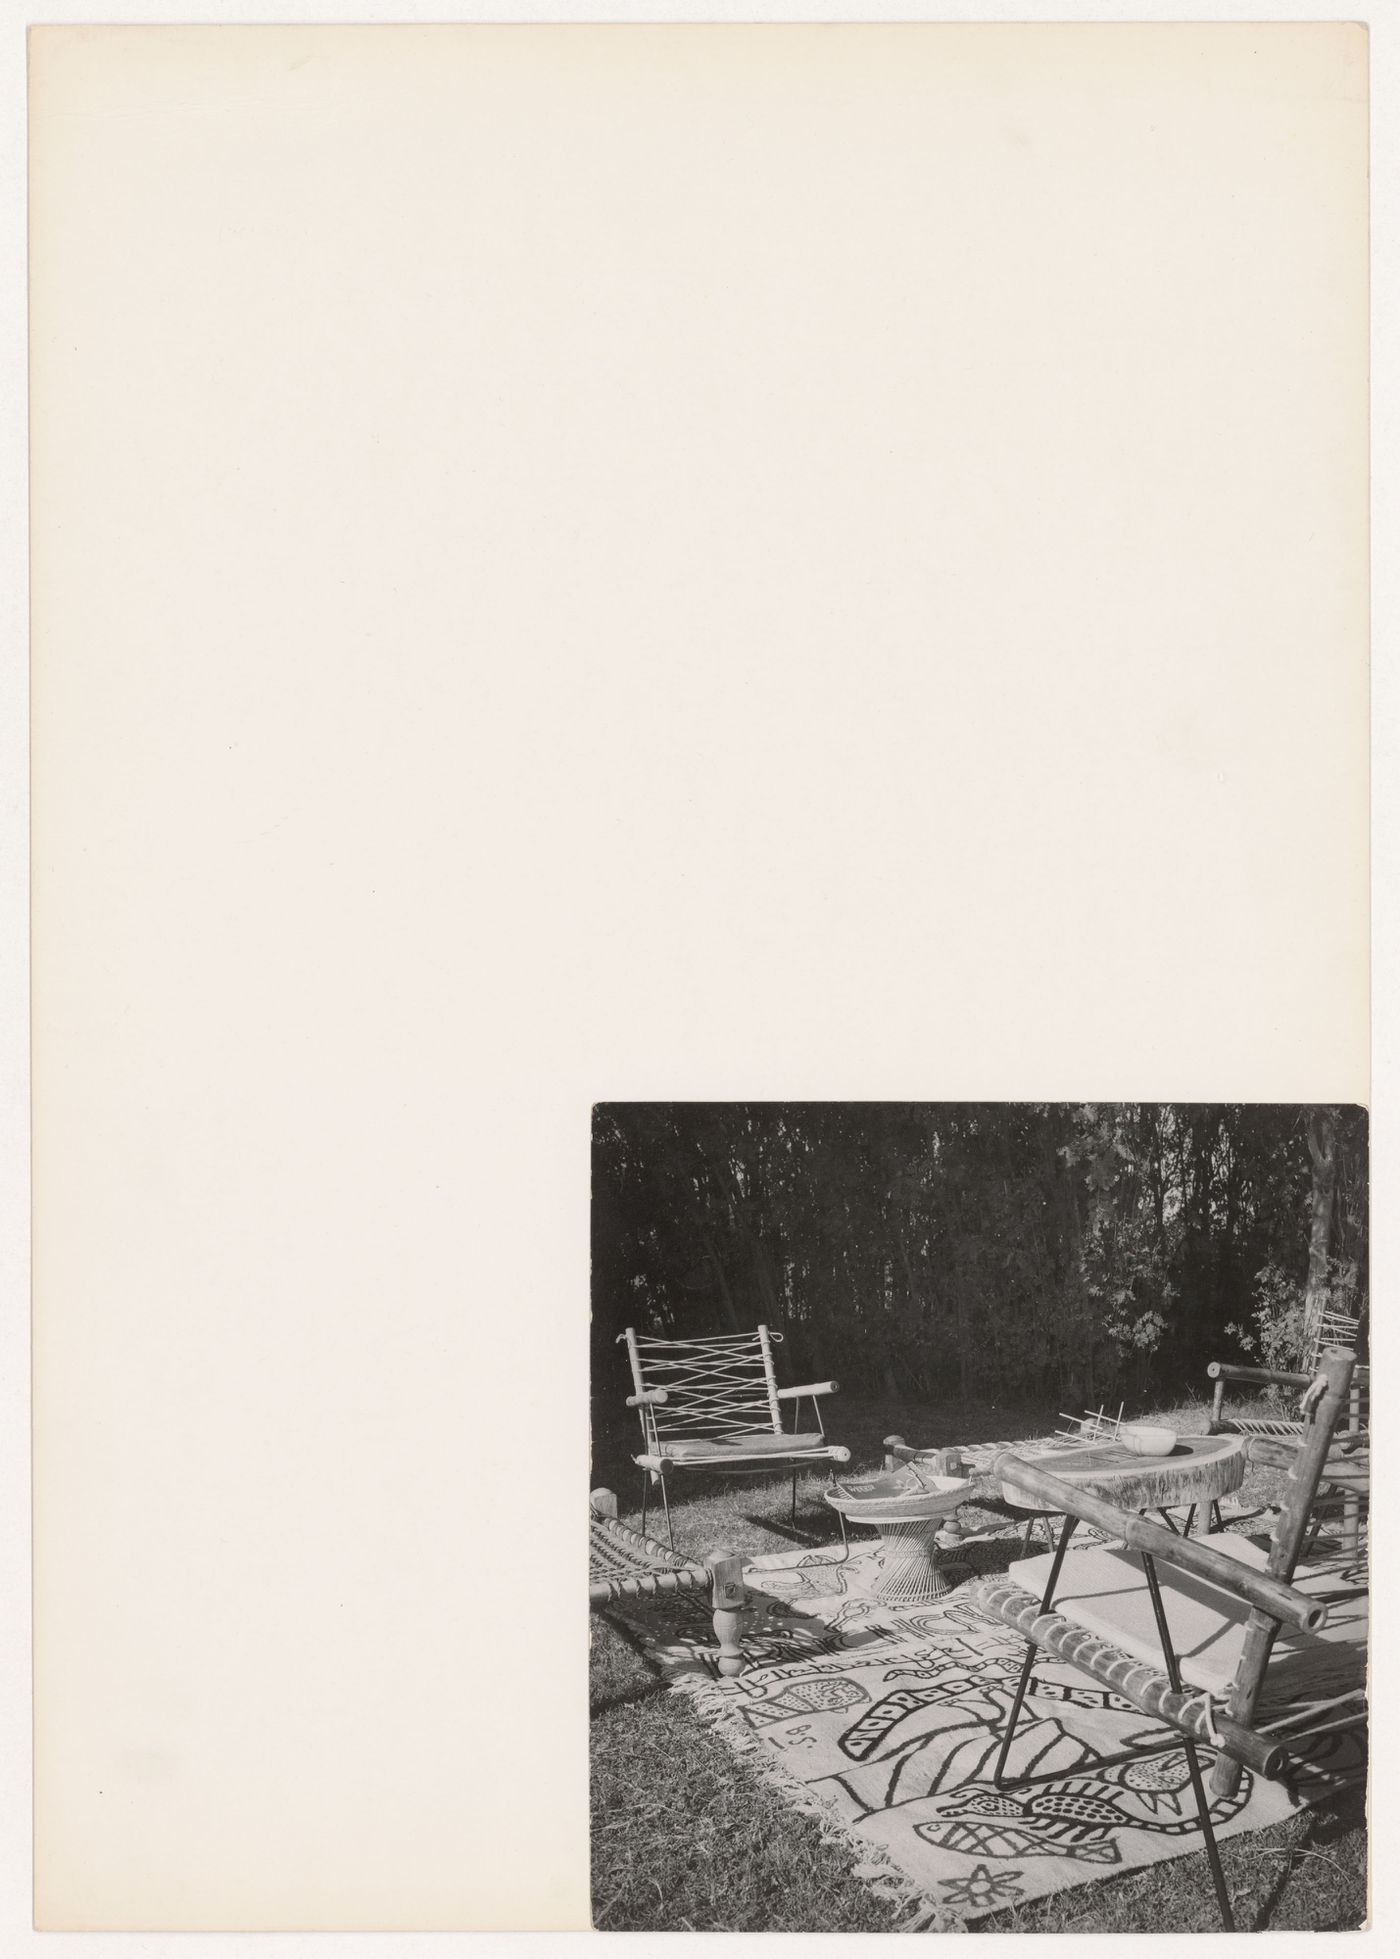 View of furniture designed by Pierre Jeanneret, Chandigarh, India